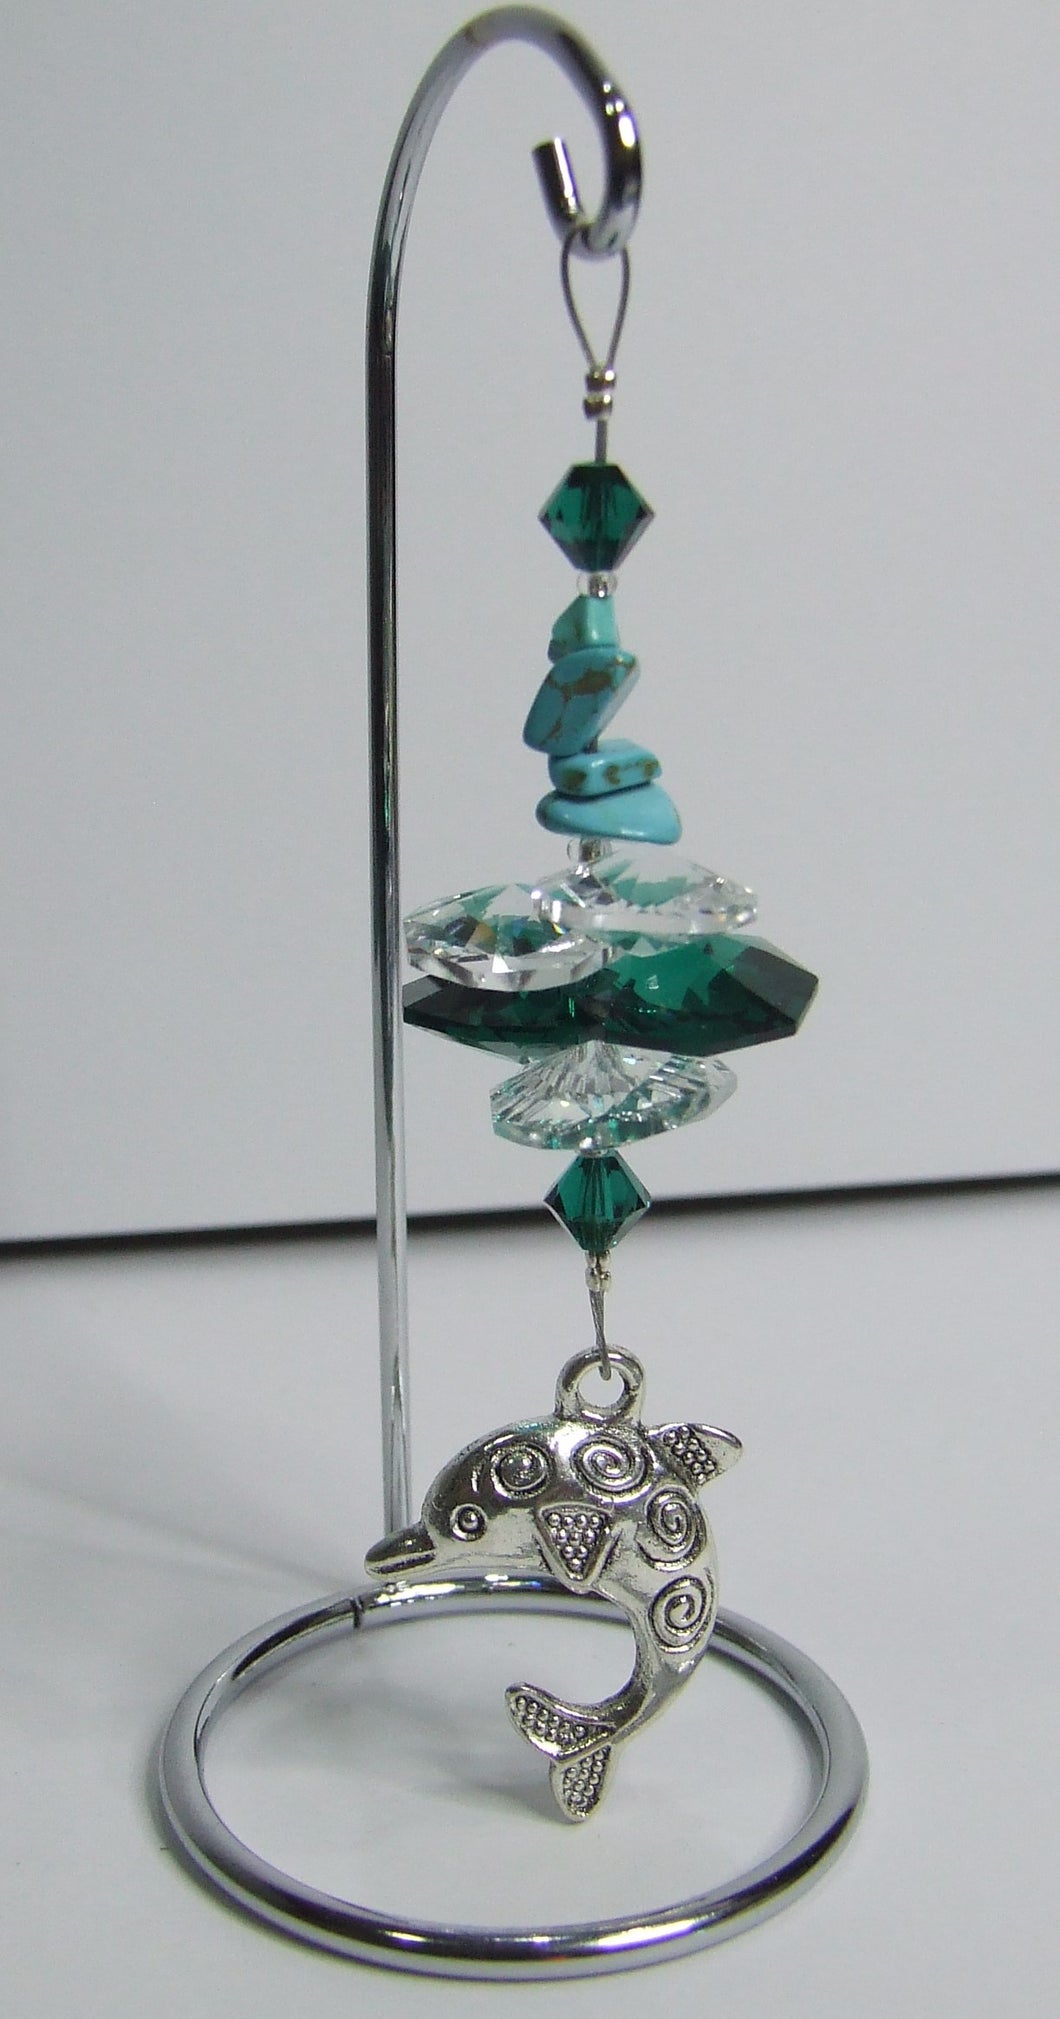 Dolphin -green crystal suncatcher is decorated with malachite gemstones and come on this amazing small stand.